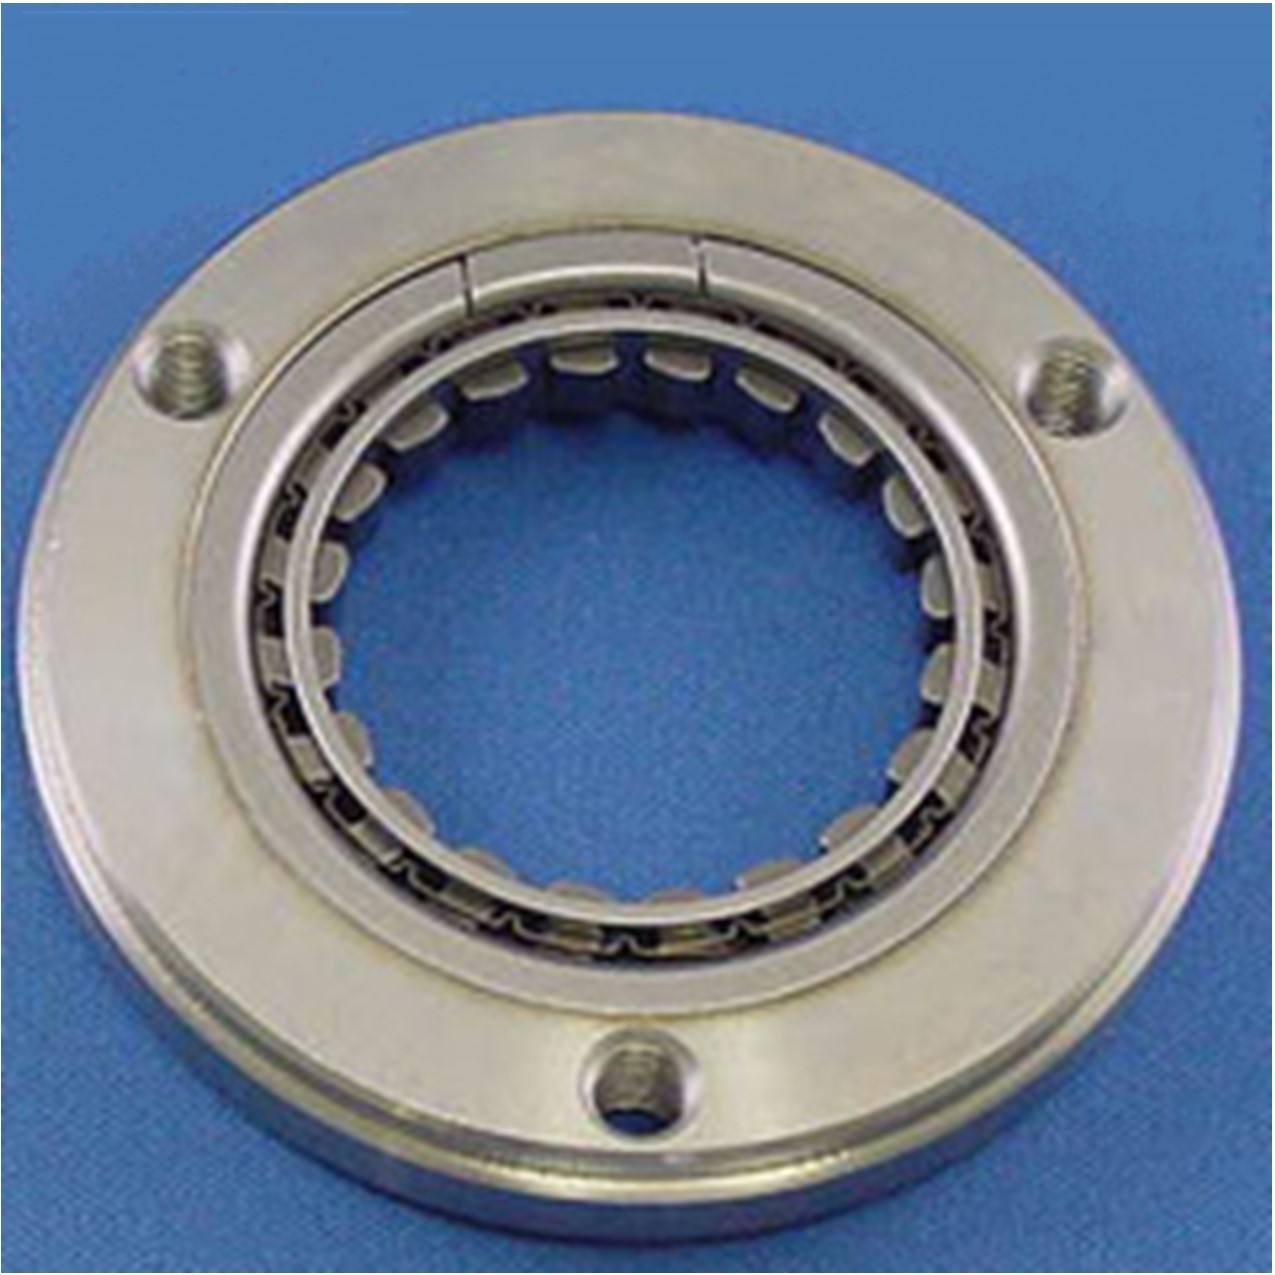 Starter Clutch 250cc Fits Many GY6-CF-CN-CH 250cc + Honda Type Vertical Cylinder Motors Fits E-Ton Vector 250 ATVs + More